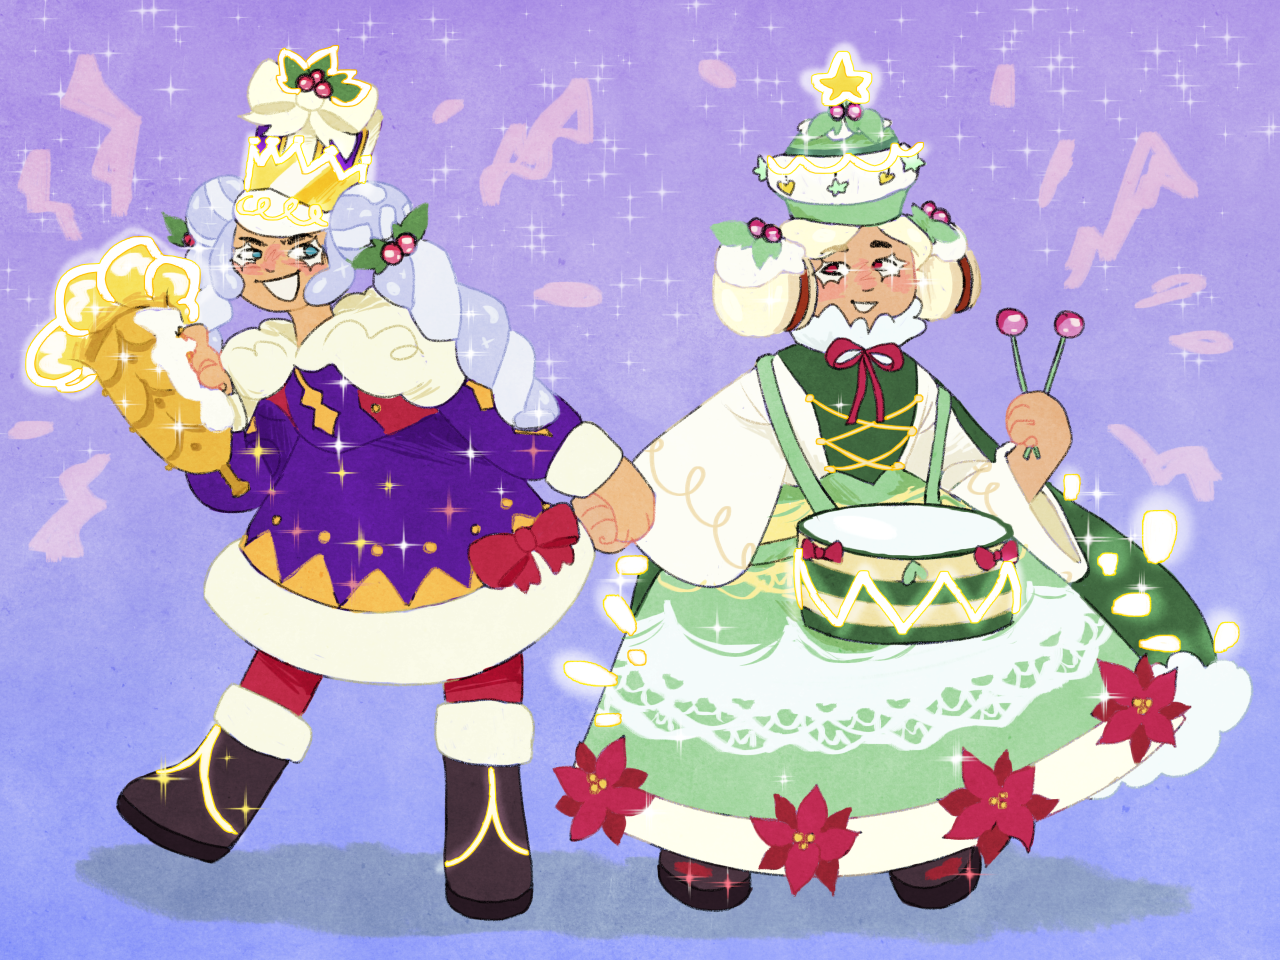 December 10, 2020. marshmallow cookie and macaron cookie from cookie run